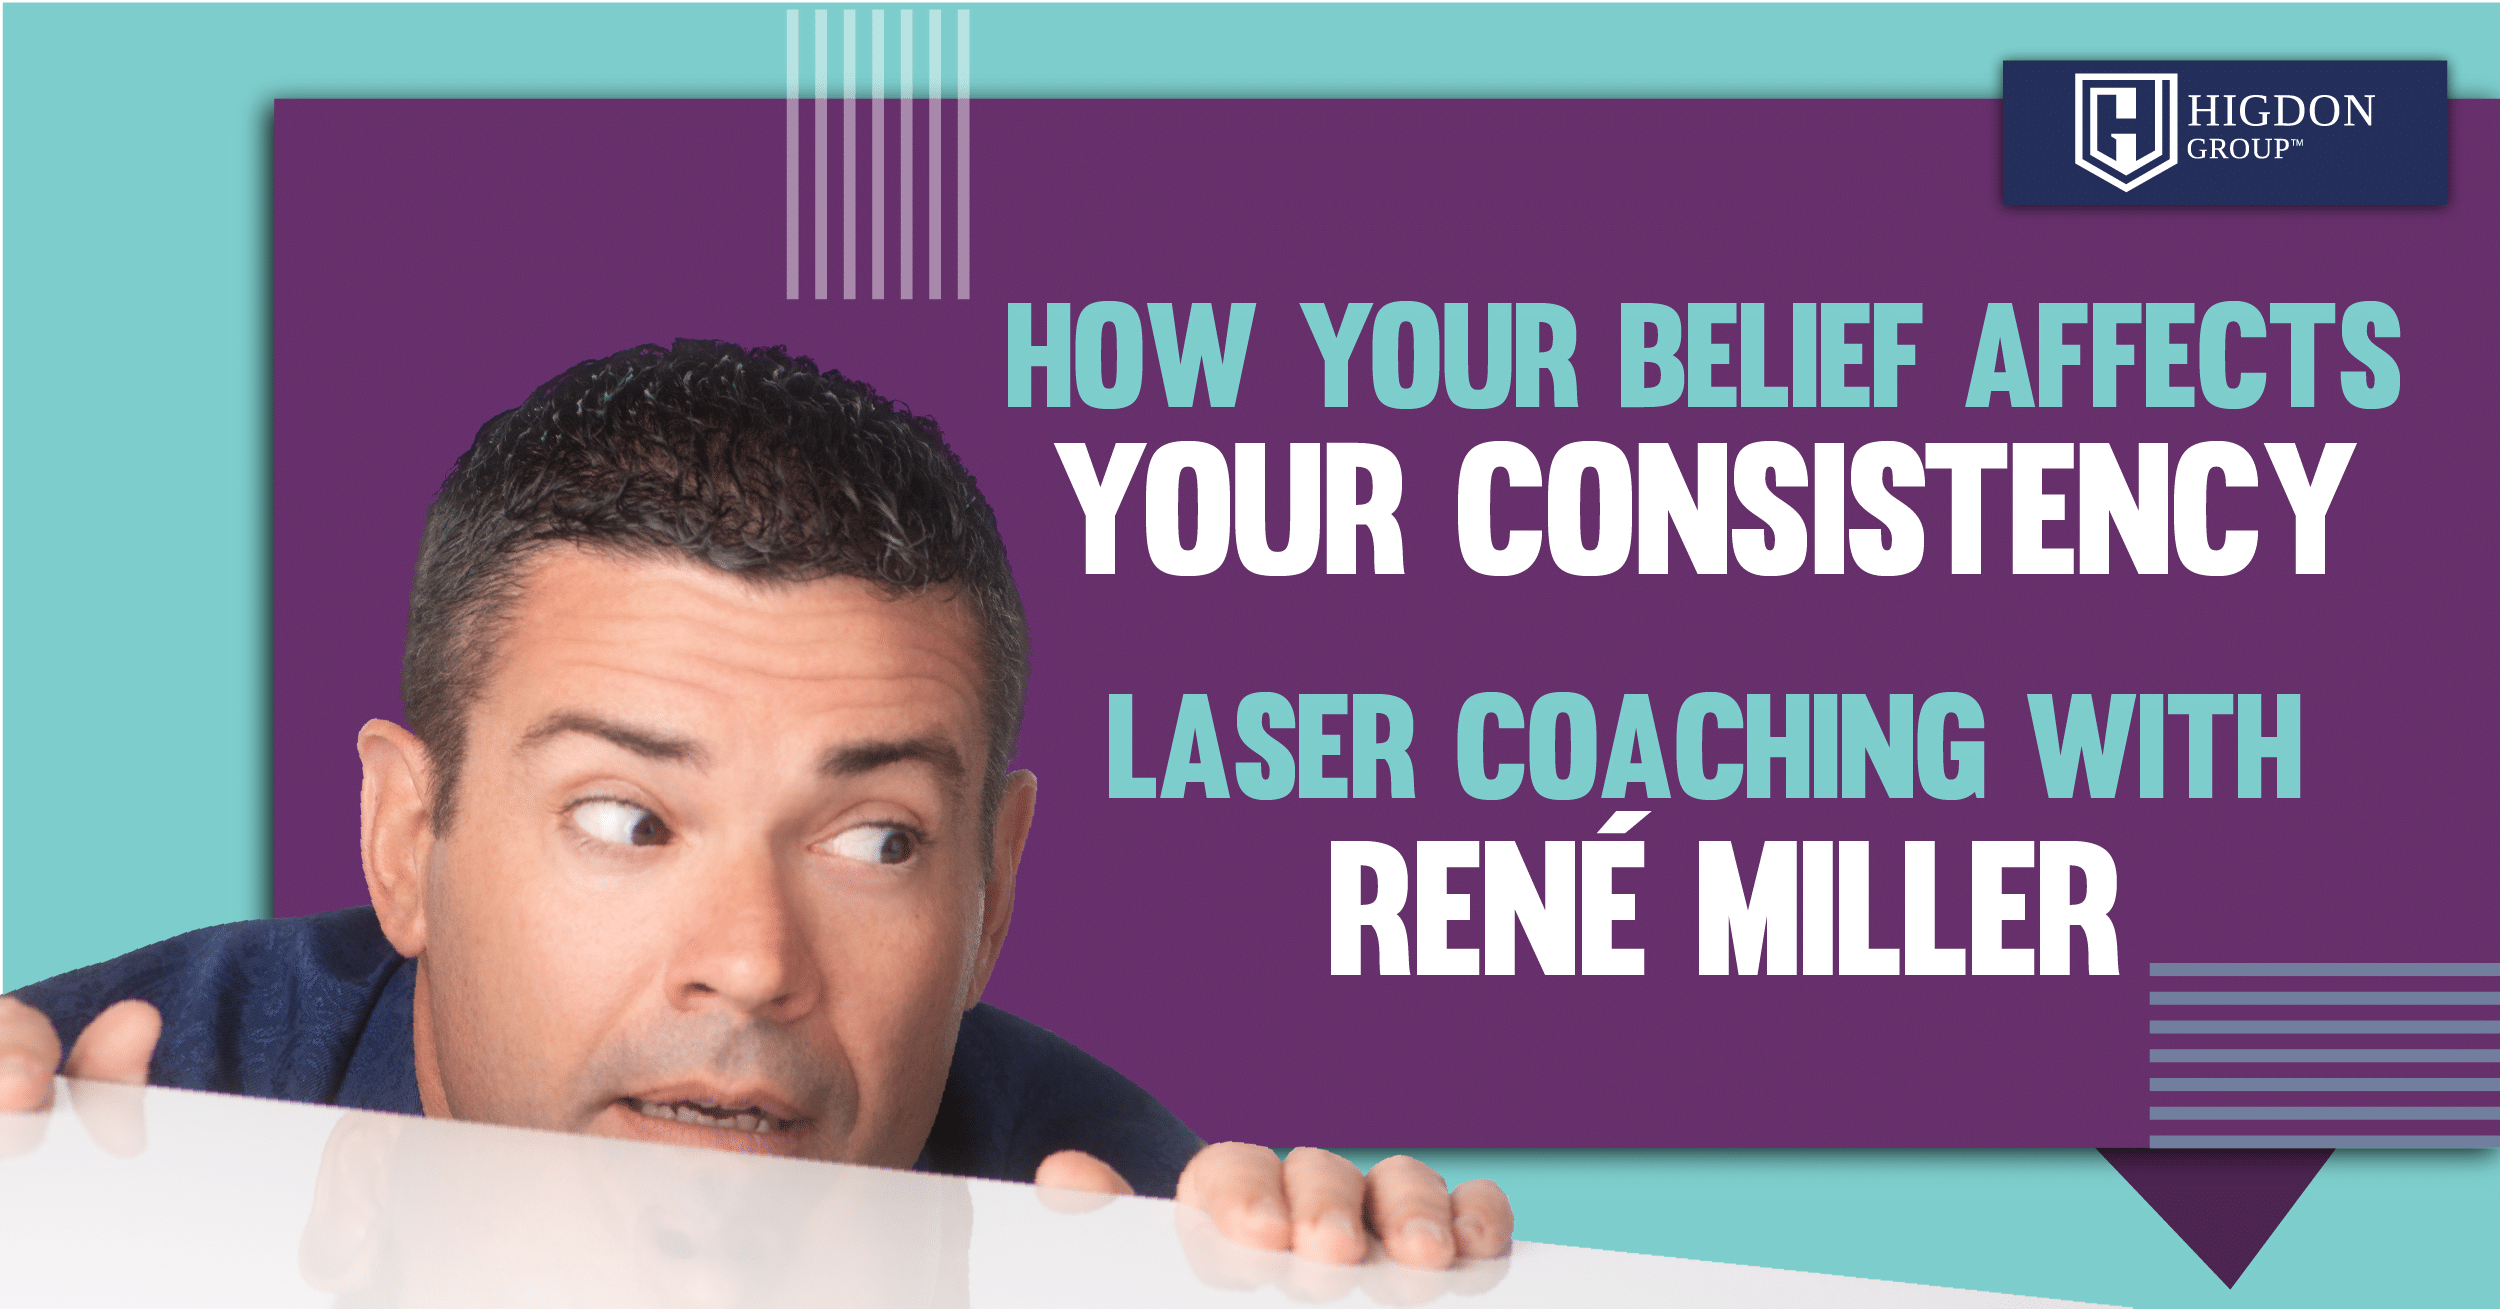 Change Your Mindset About Yourself – How Your Belief Affects Your Consistency (Laser Coaching with René Miller)